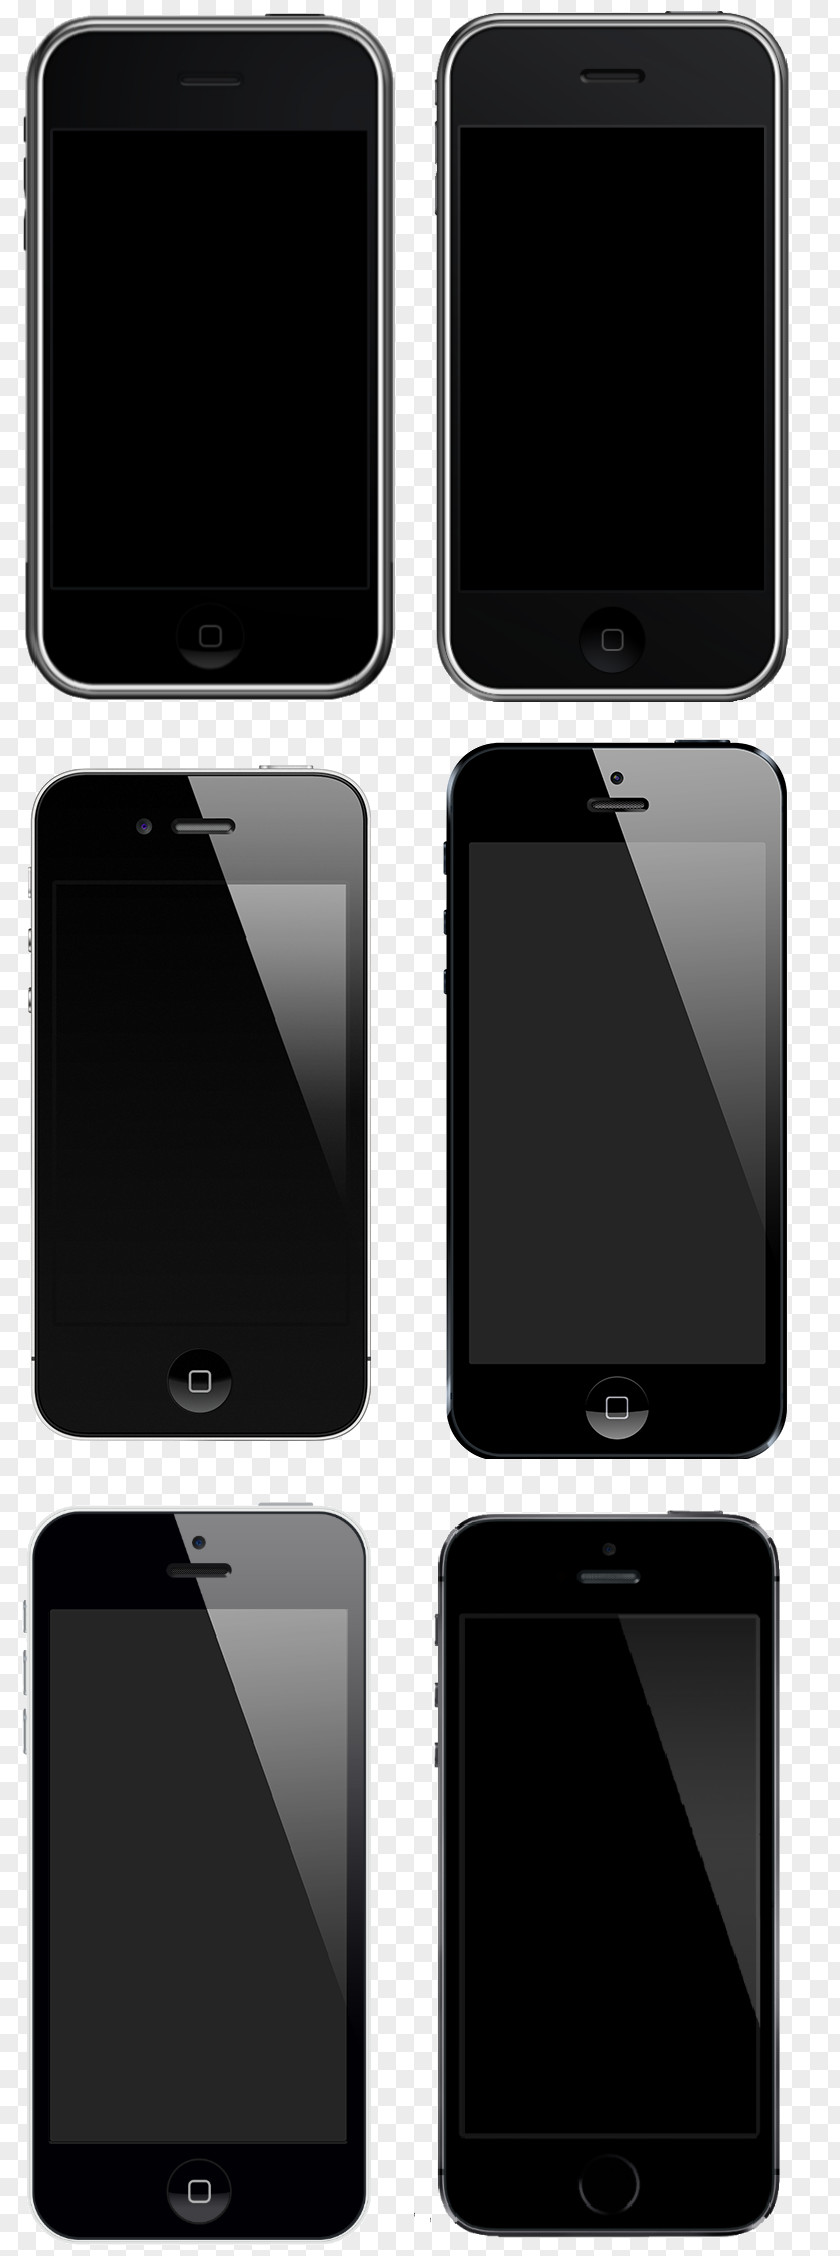 Apple IPhone 4S 8 Smartphone PNG